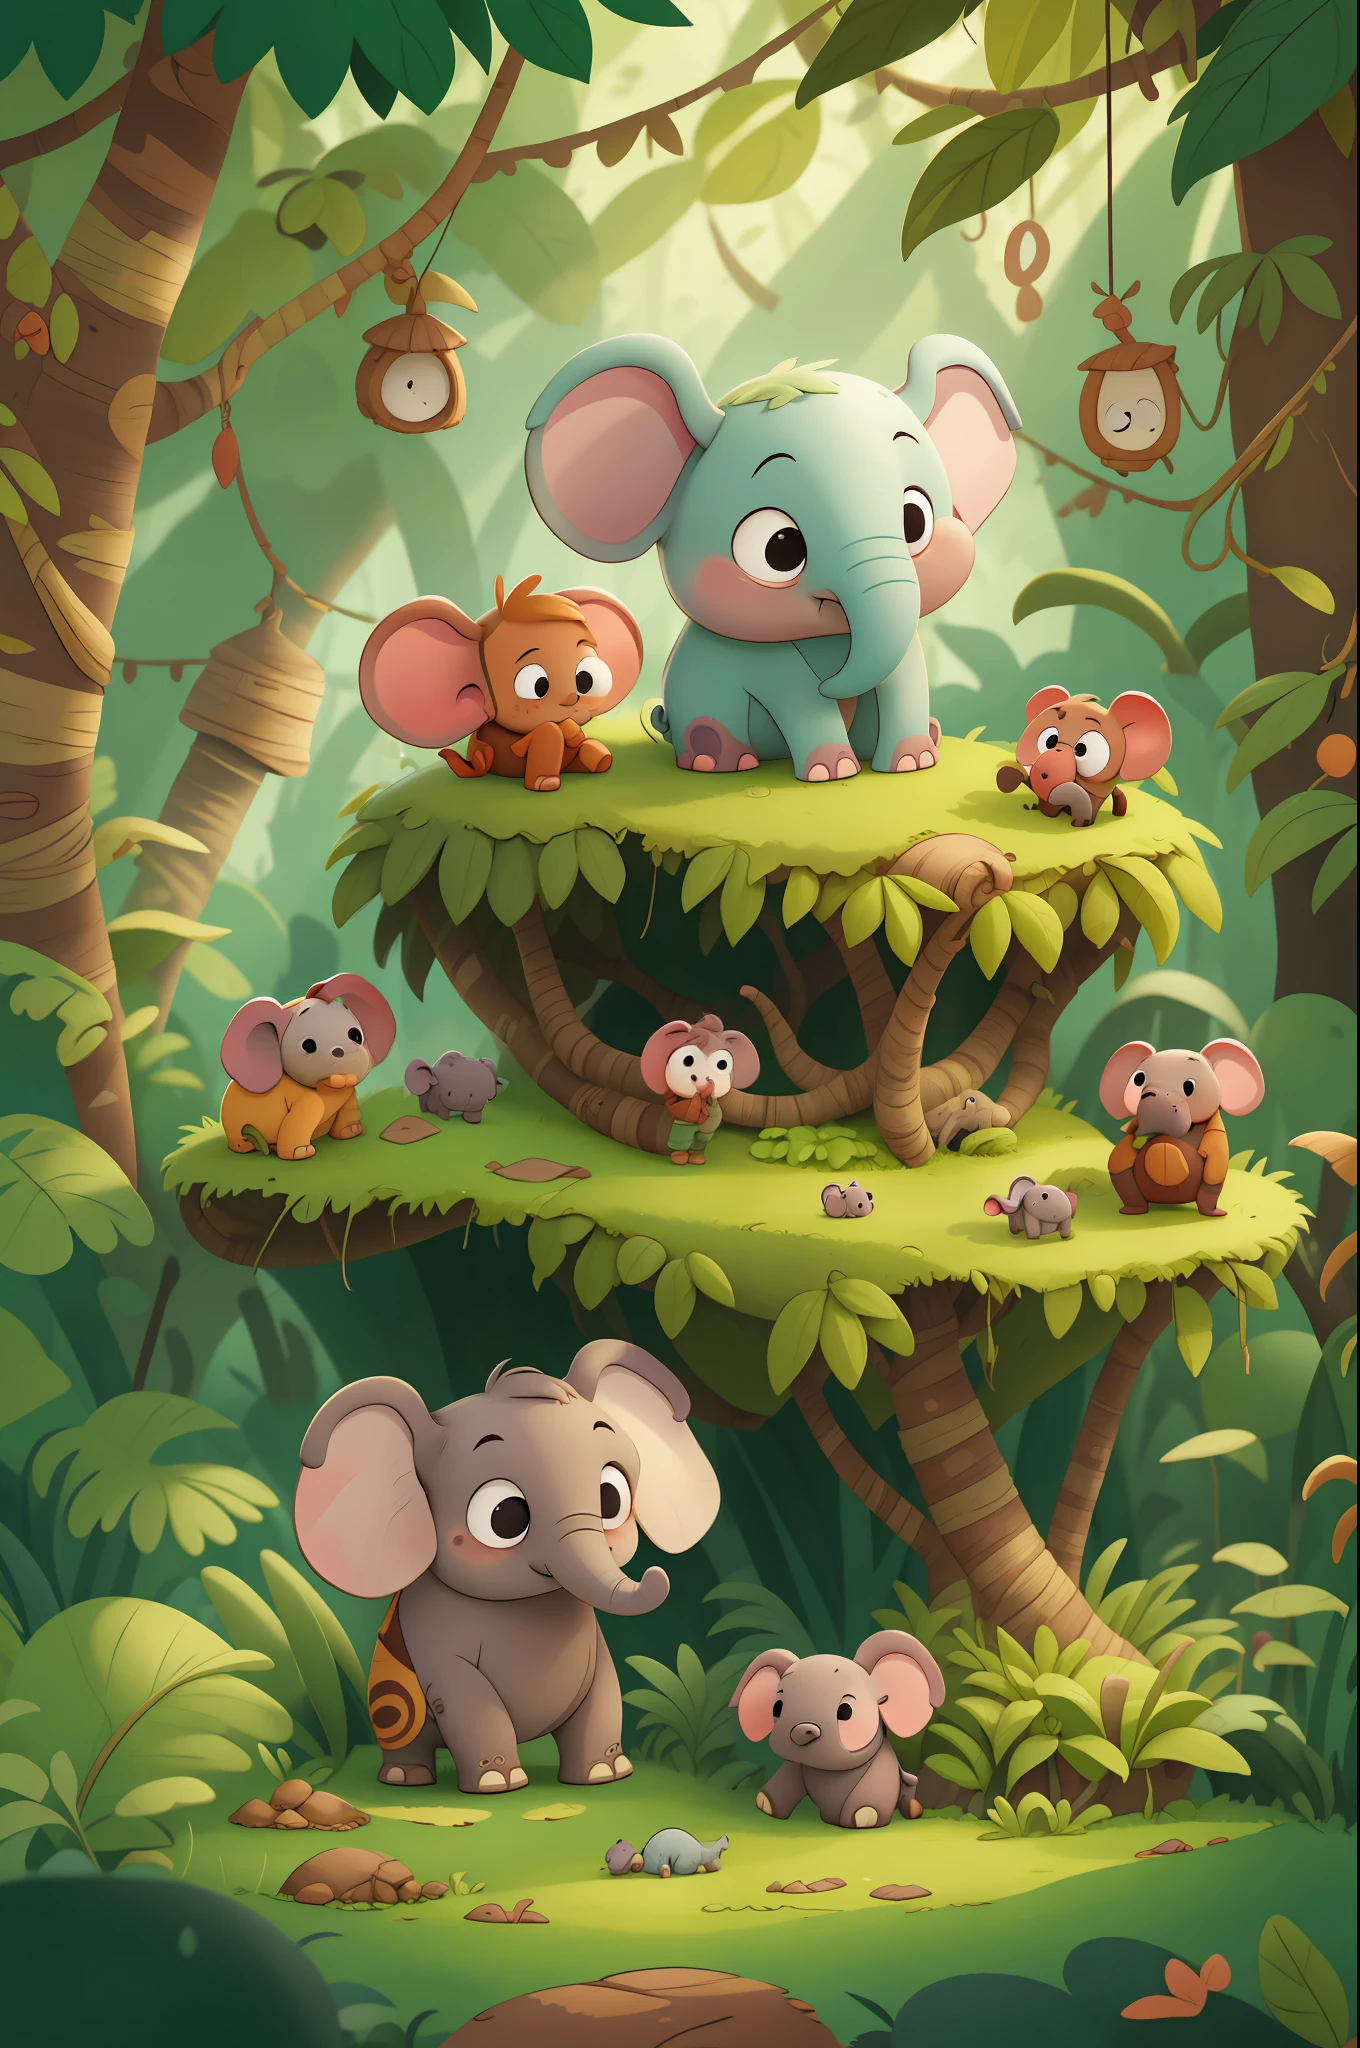 Once upon a time there was a little elephant named Doug who lived in the jungle with his family. Doug was very curious and loved exploring the world around him. Children's book, in the animation style.